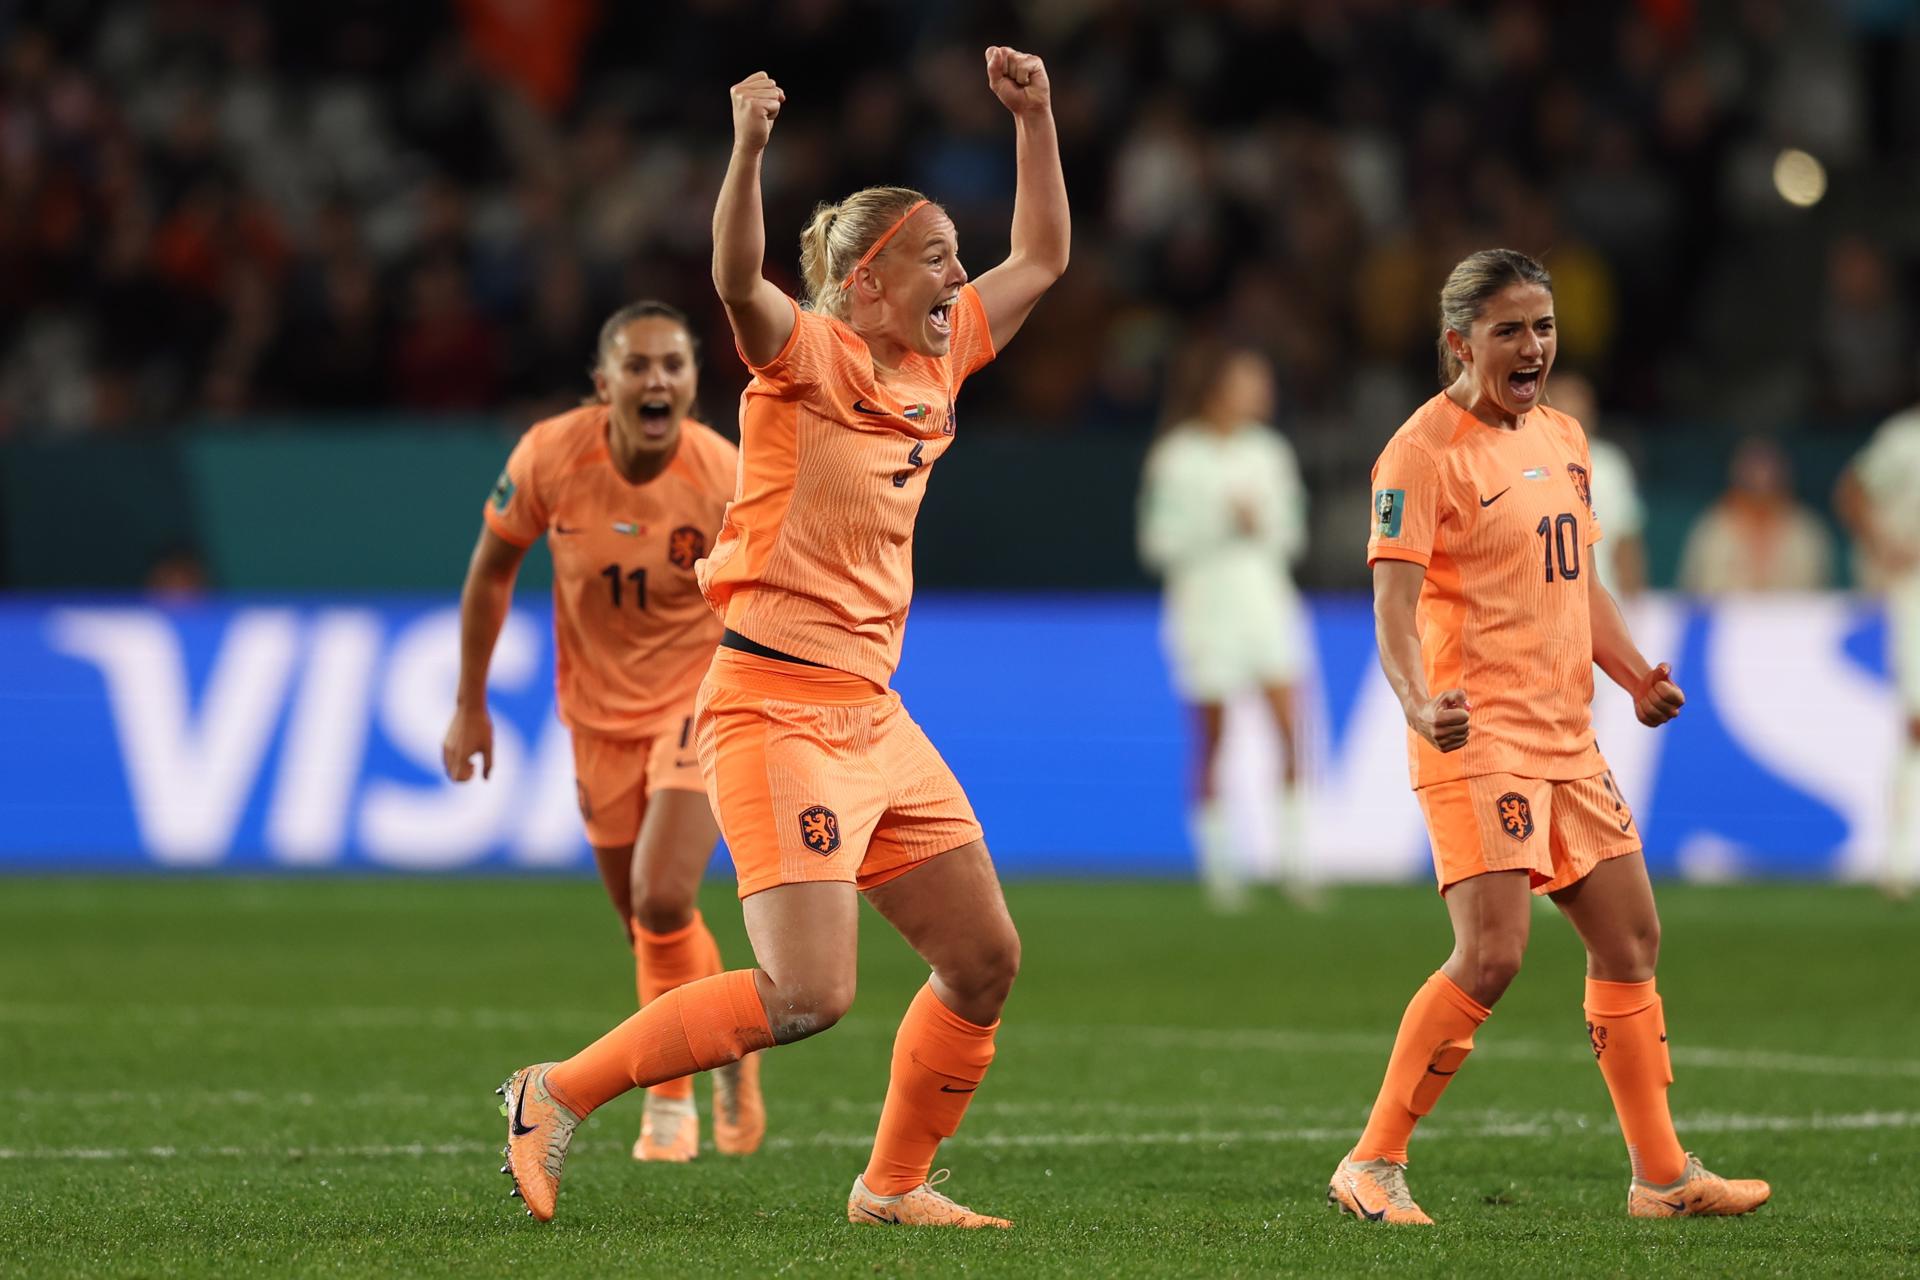 Netherlands players celebrate defeating Portugal in their group stage match at the 2023 Women's World Cup in Dunedin, New Zealand, on 23 July 2023. EFE/EPA/RITCHIE B. TONGO